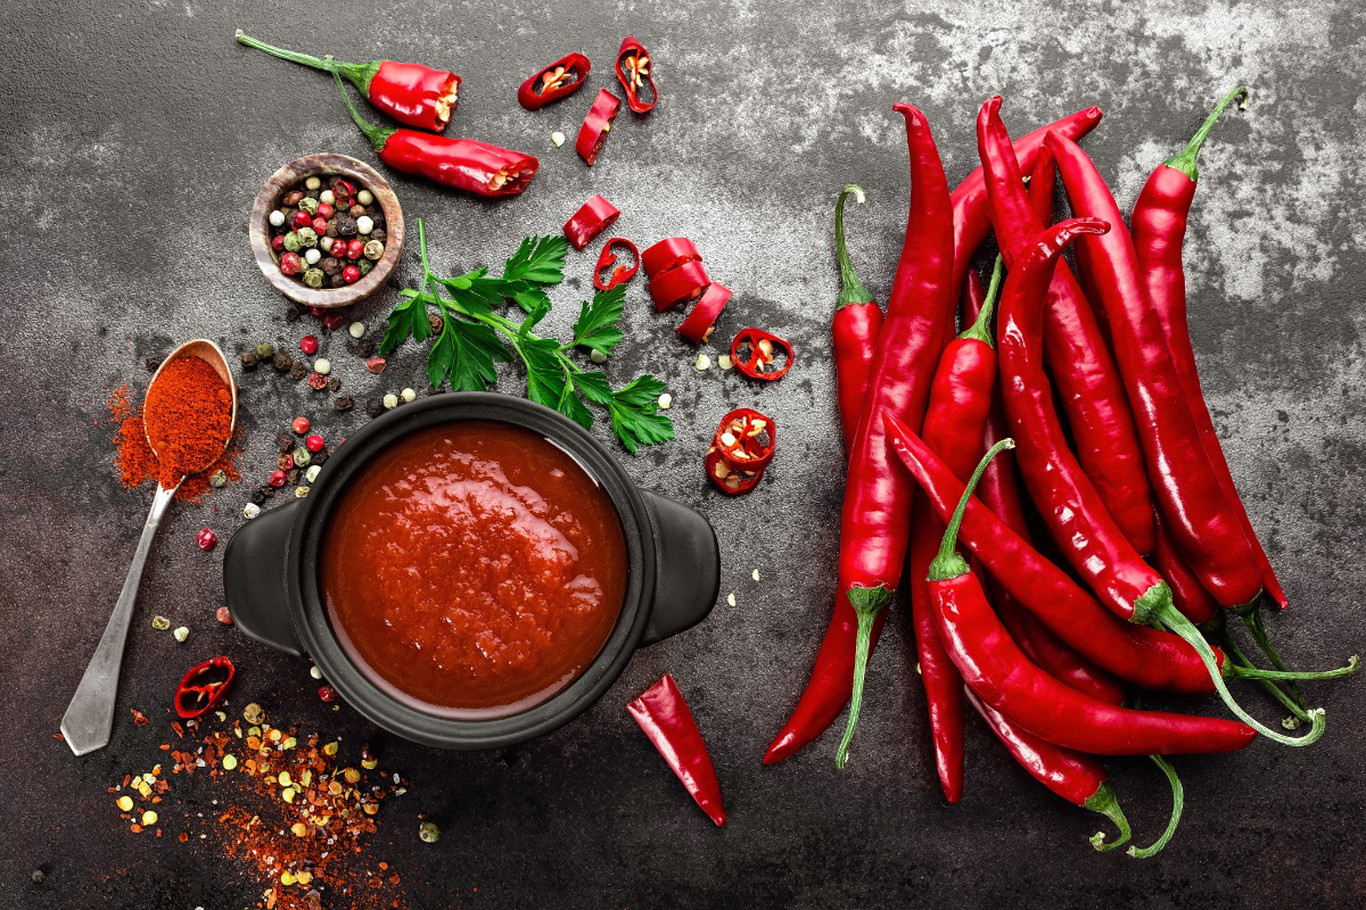 5 Types of Hot Sauce to Spice Up Your Diet